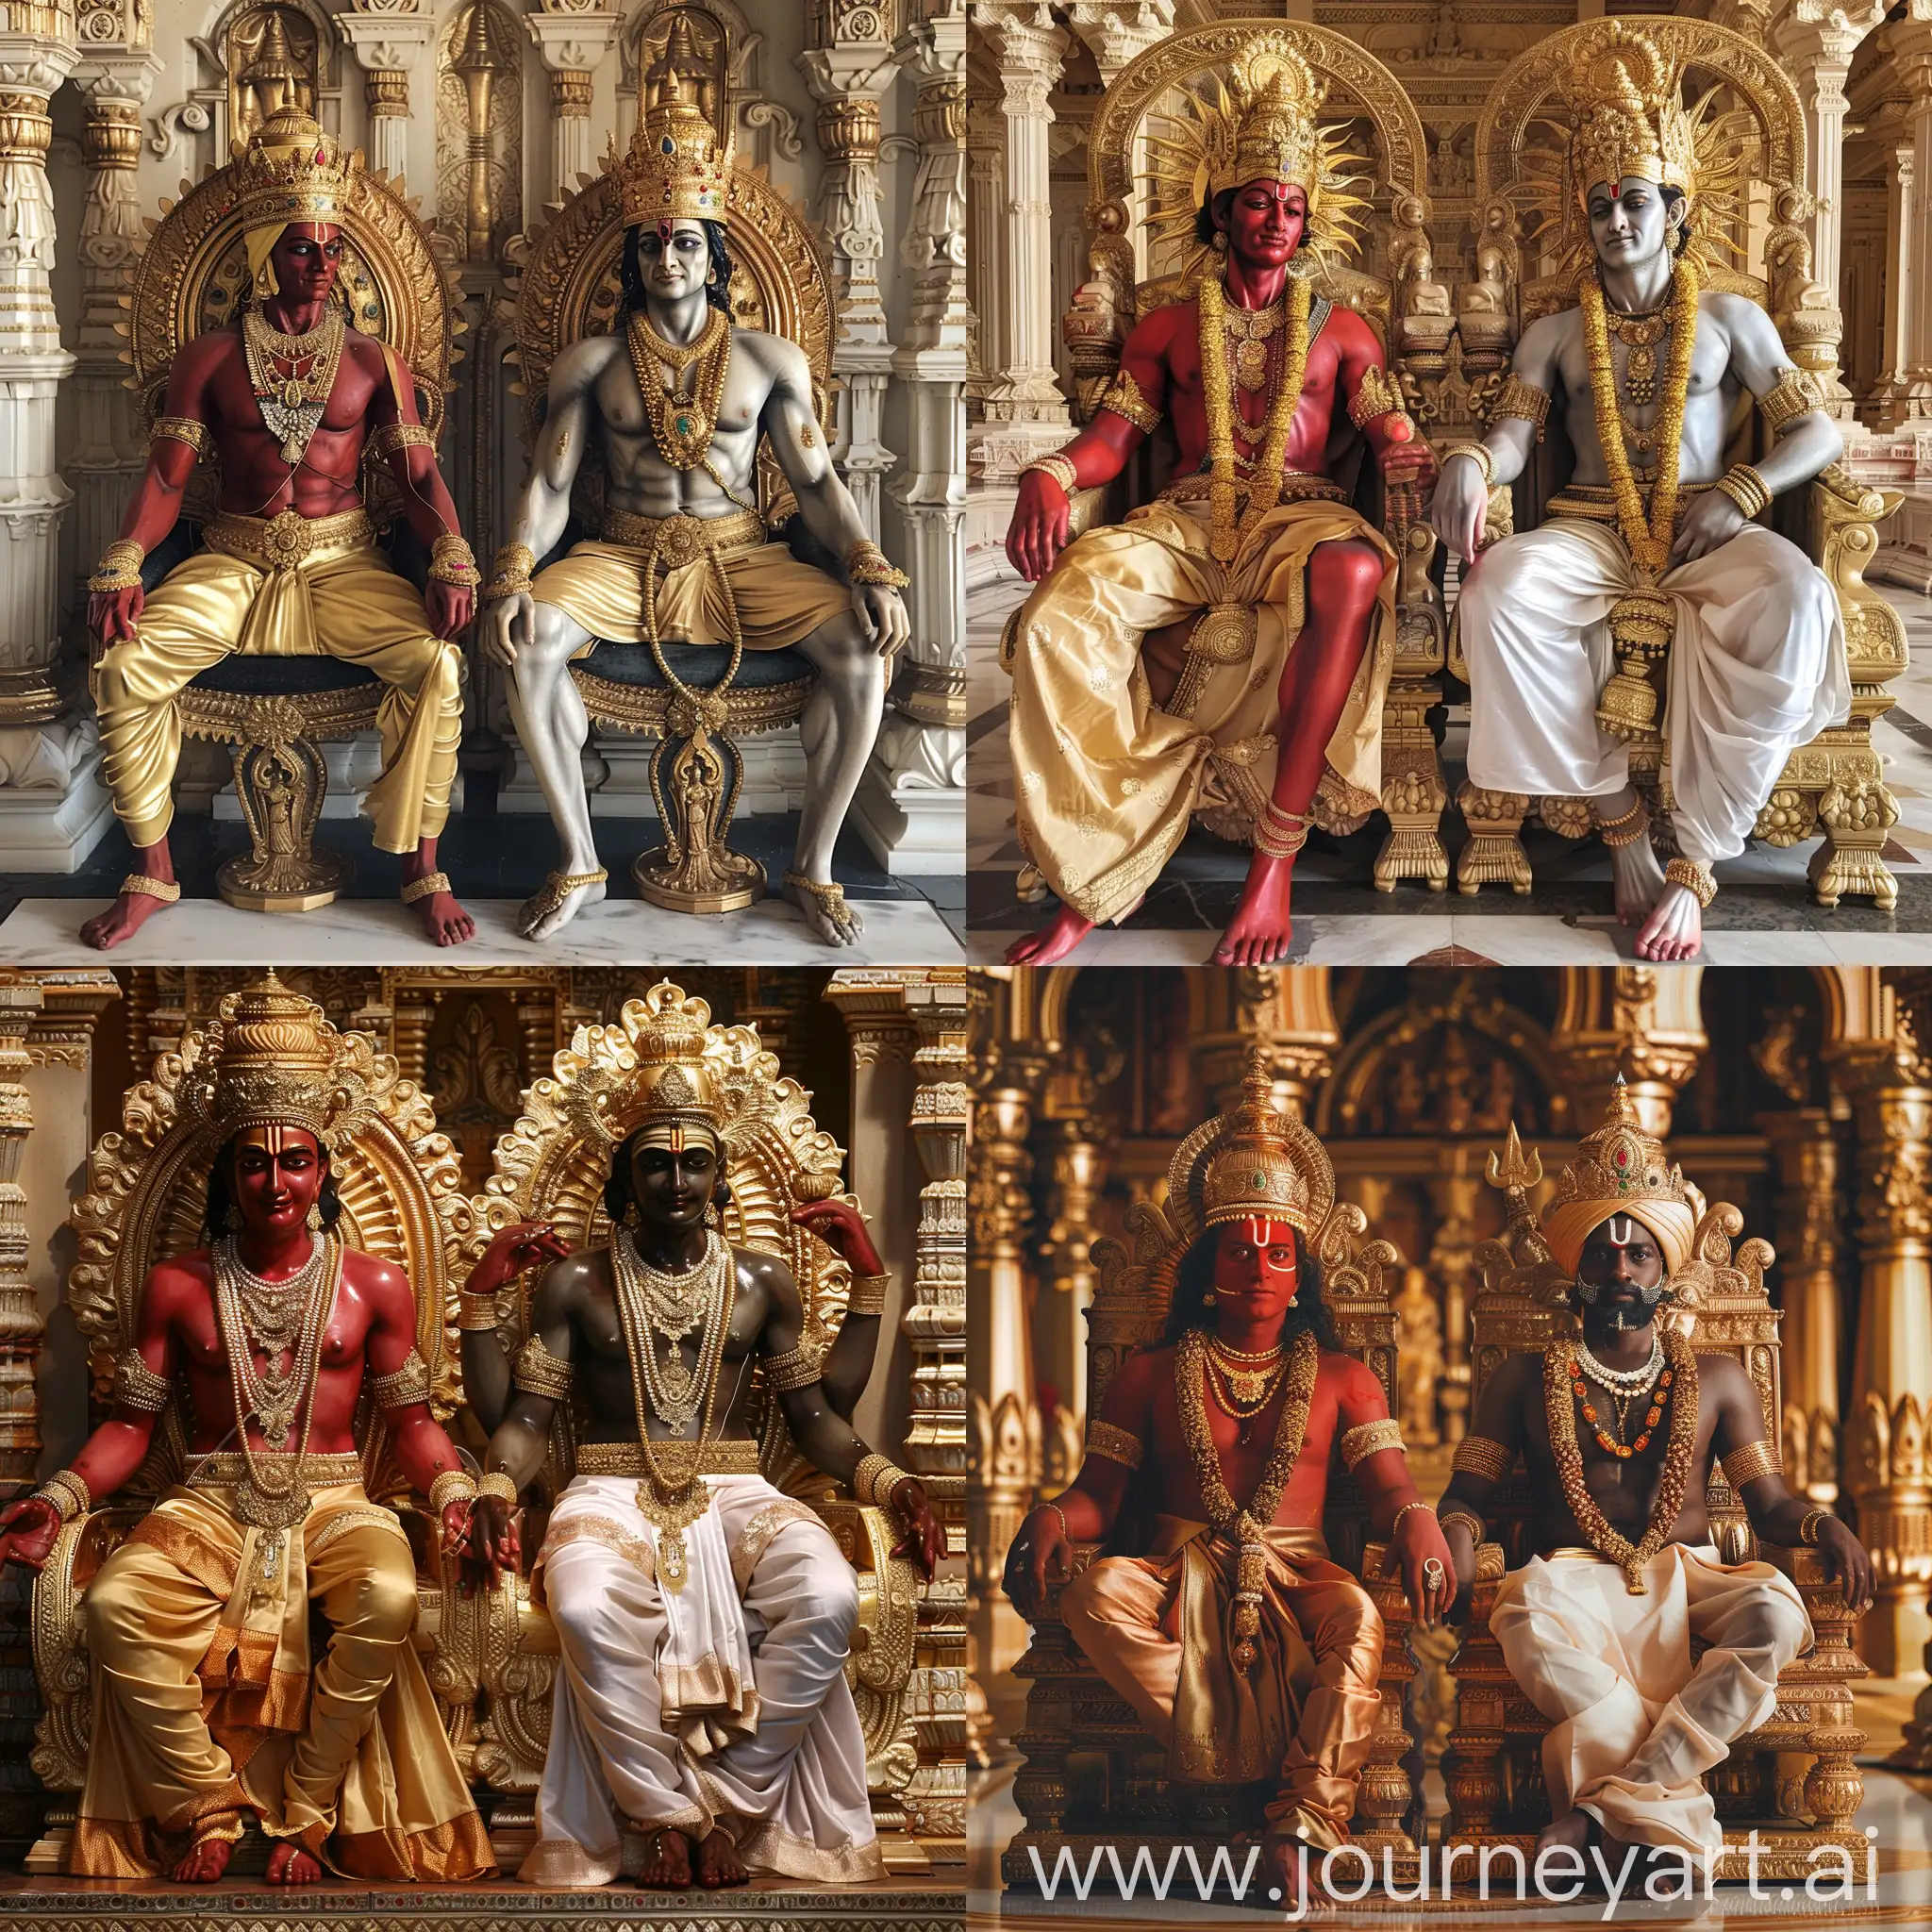 Divine-Encounter-Surya-and-Chandra-on-Imperial-Thrones-in-a-Hindu-Temple